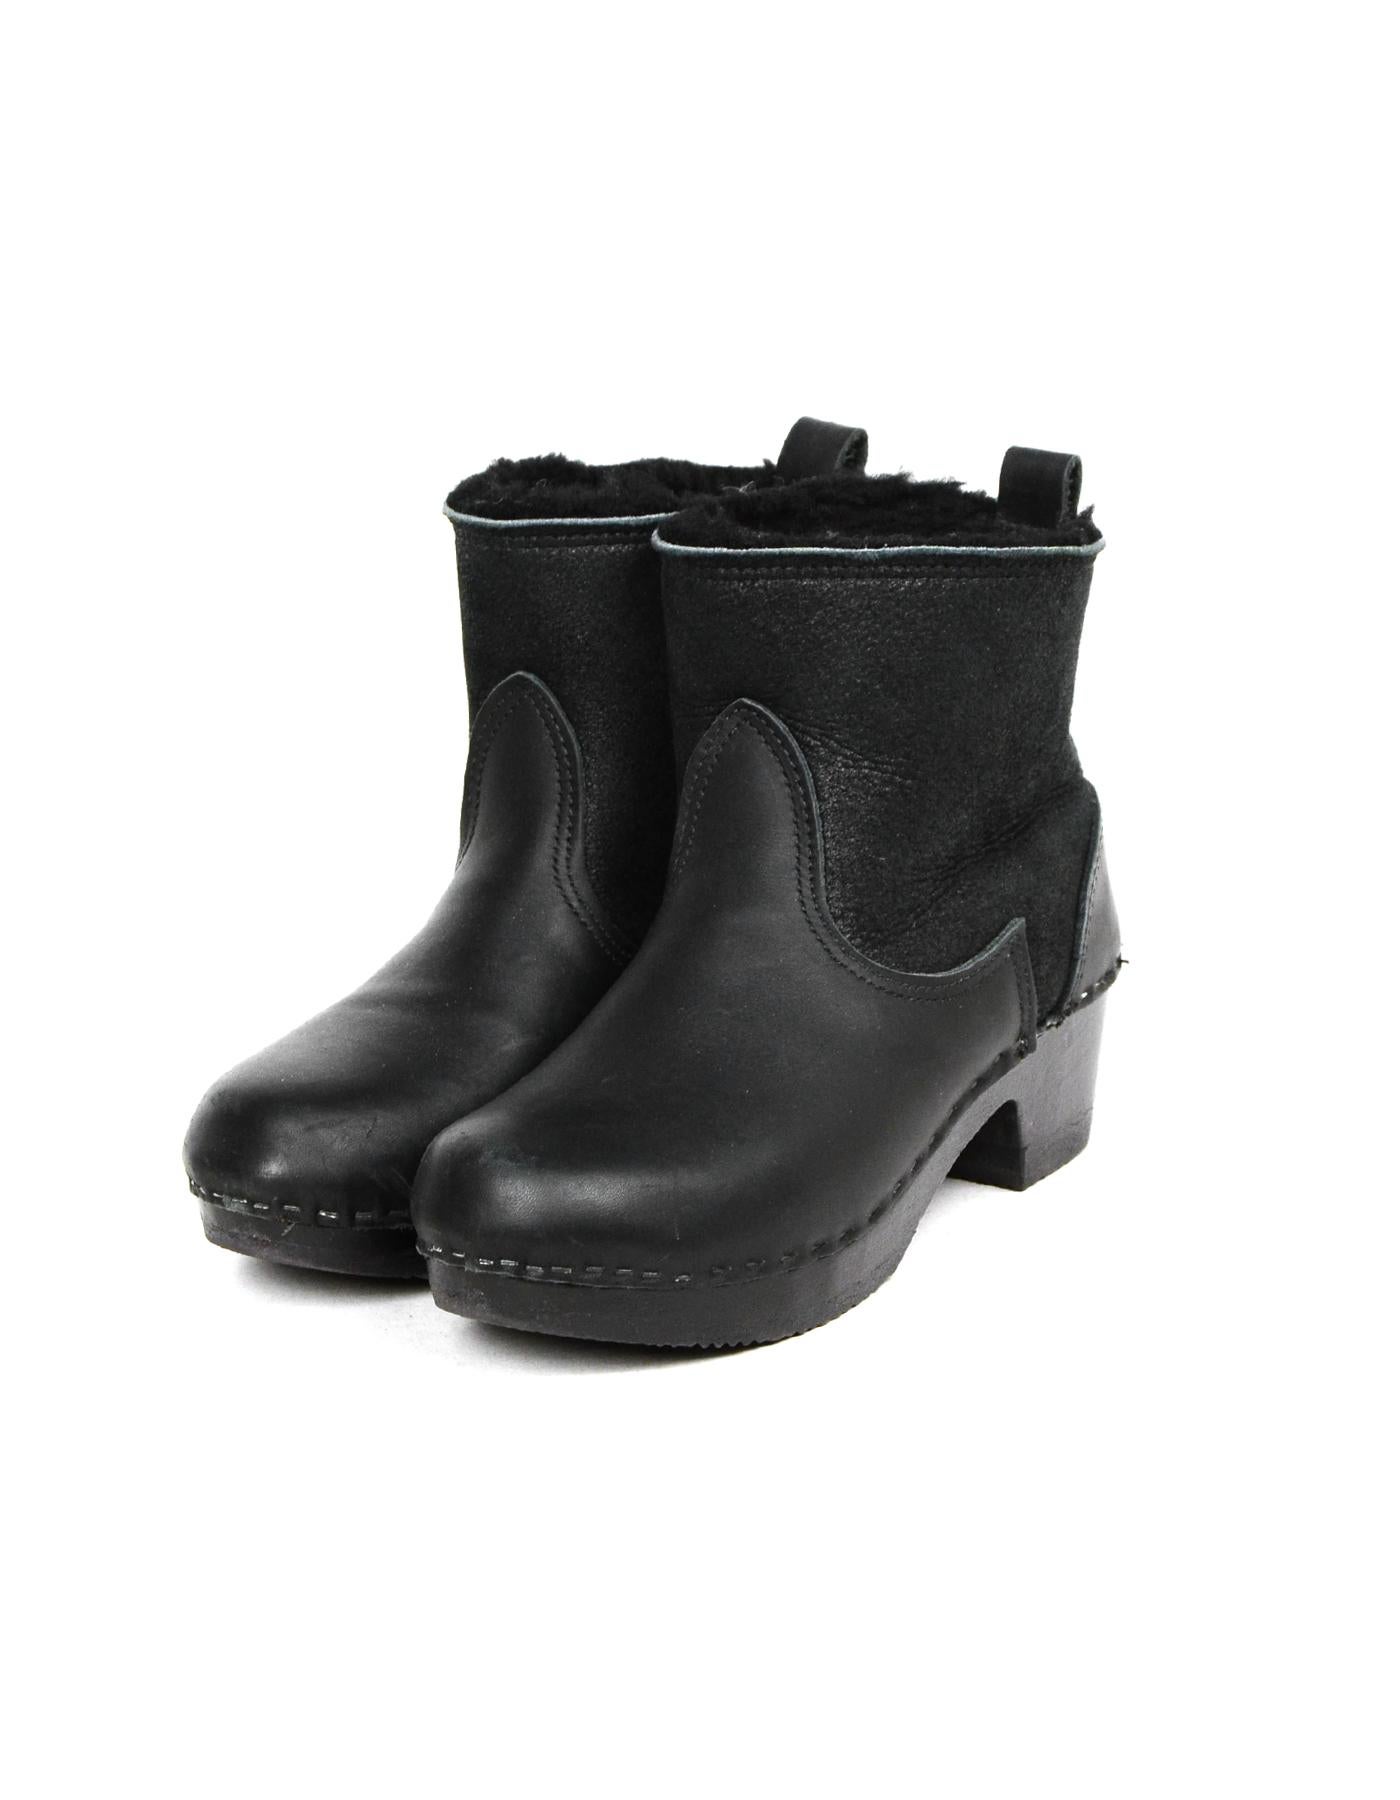 NO. 6 Black Leather/Suede Shearling-Lined Heeled Ankle Boots Sz 40

Color: Black
Materials: Leather, suede, shearling
Closure/Opening: Slide on
Overall Condition: Excellent pre-owned condition with exception of minor scratching in heel and at